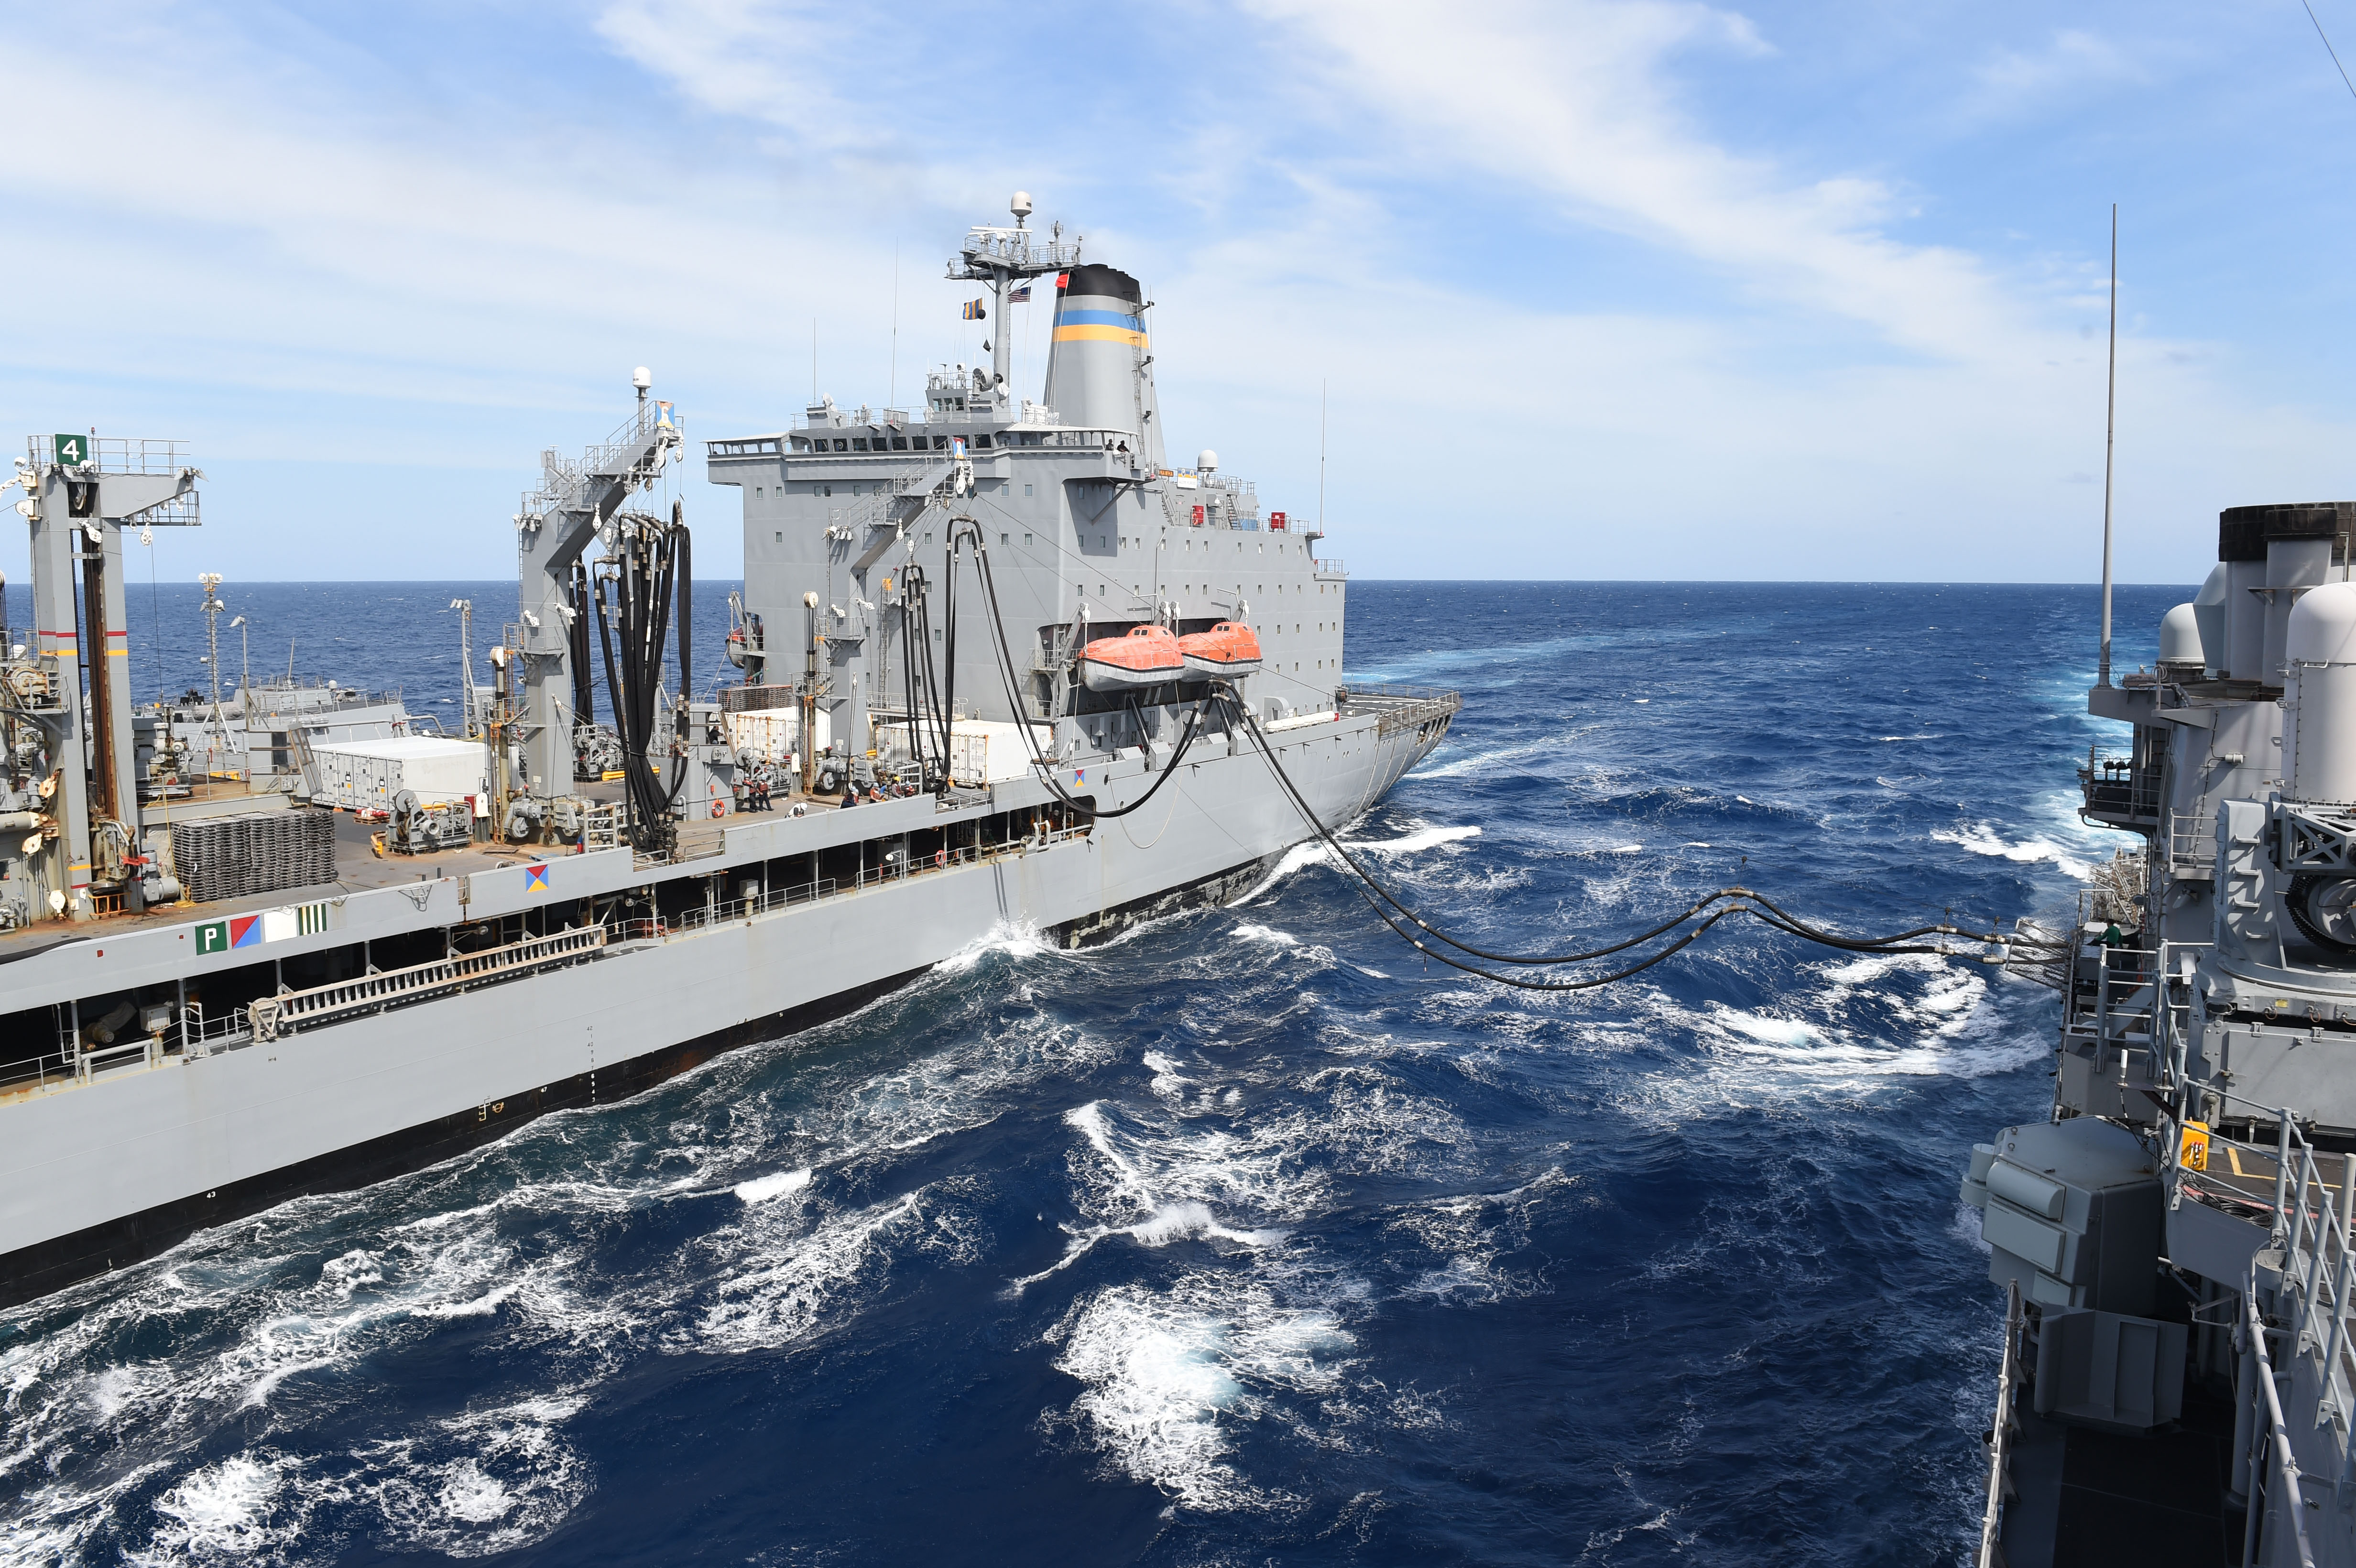 The guided-missile cruiser USS Vicksburg (CG-69) conducts a replenishment-at-sea with the Military Sealift Command fleet replenishment oiler USNS Kanawha (TAO-196). US Navy Photo